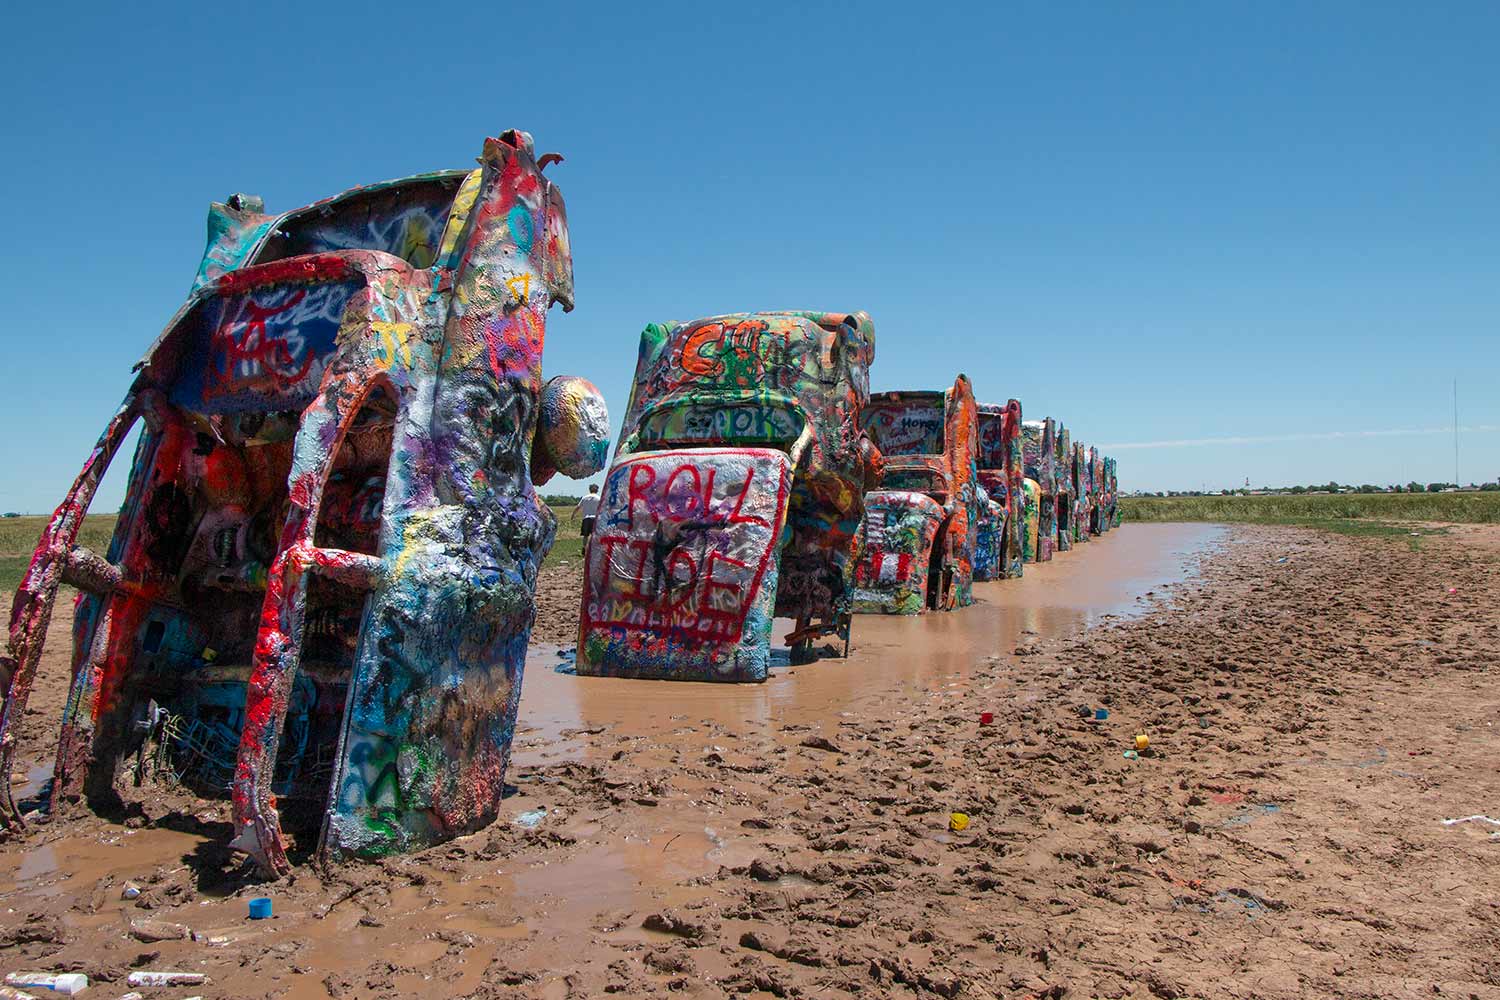 arielkatowice-route-66-cadillac-ranch-